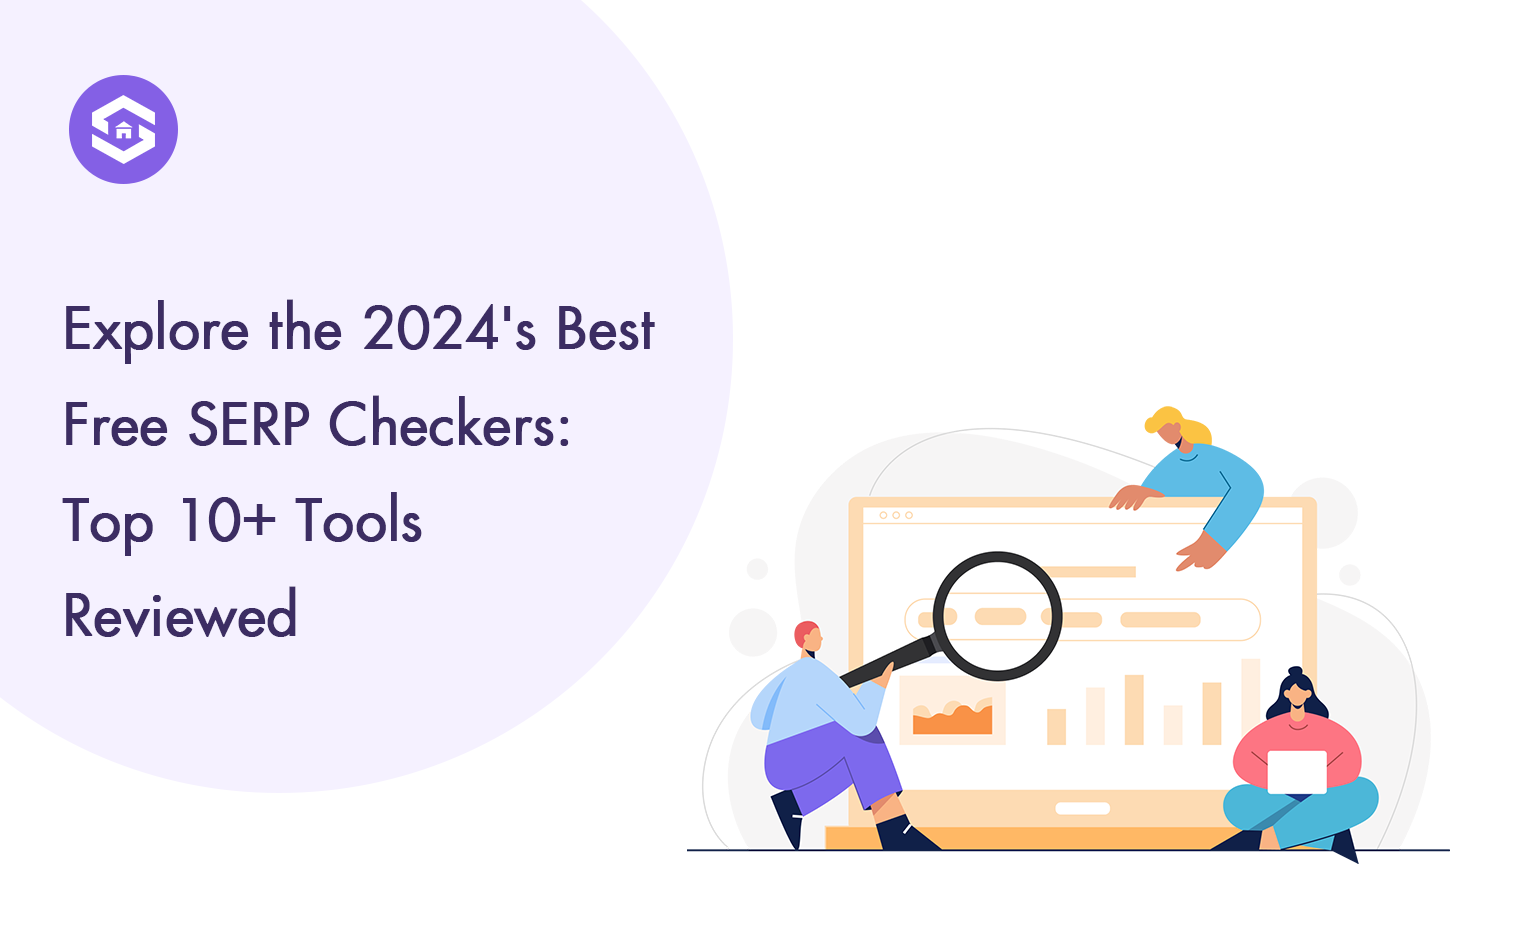 The Ultimate List of 10+ Best Free SERP Checkers for 2024